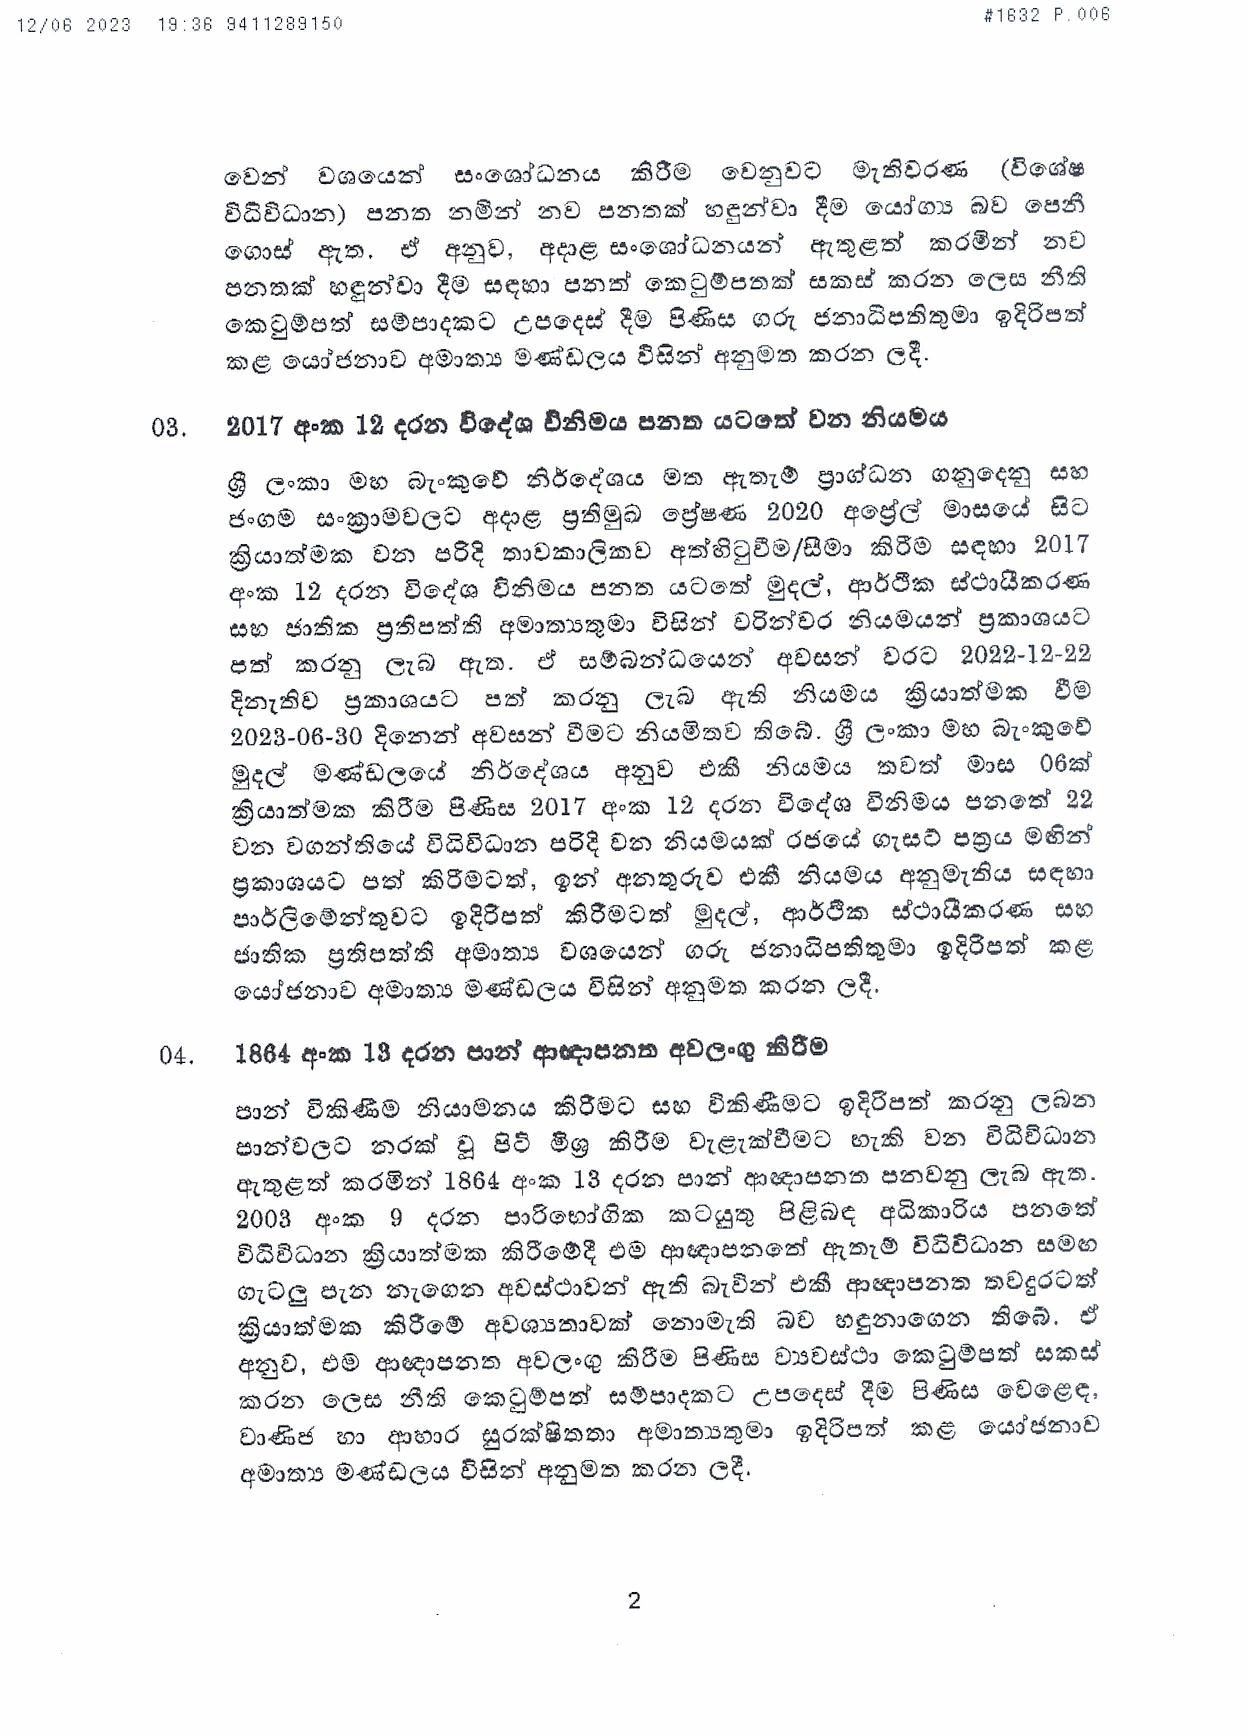 Cabinet Decision on 12.06.2023 page 002